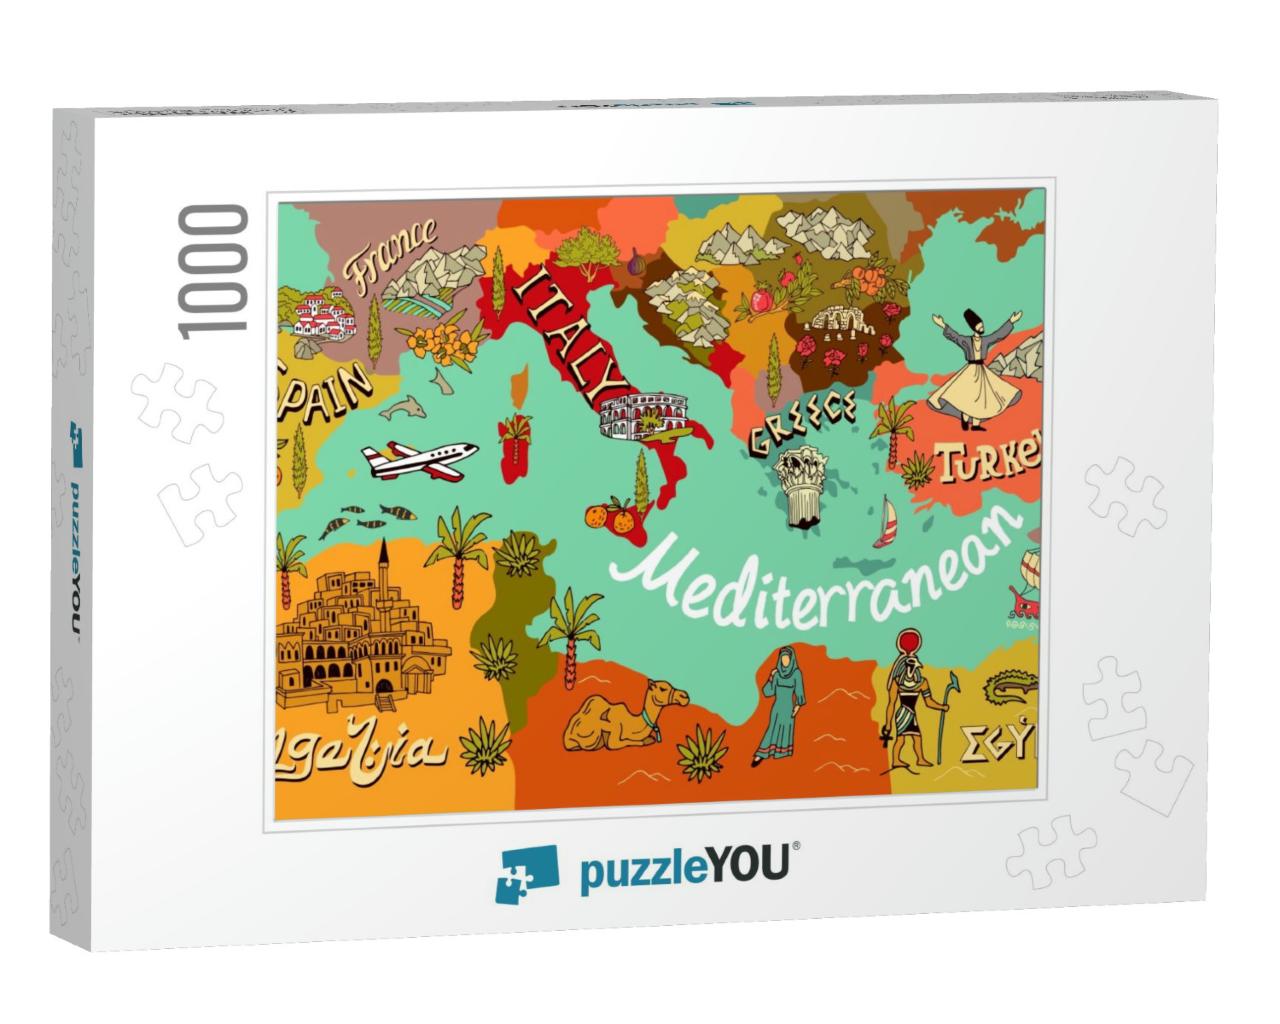 Illustrated Map of Mediterranean. Travel & Attractions... Jigsaw Puzzle with 1000 pieces